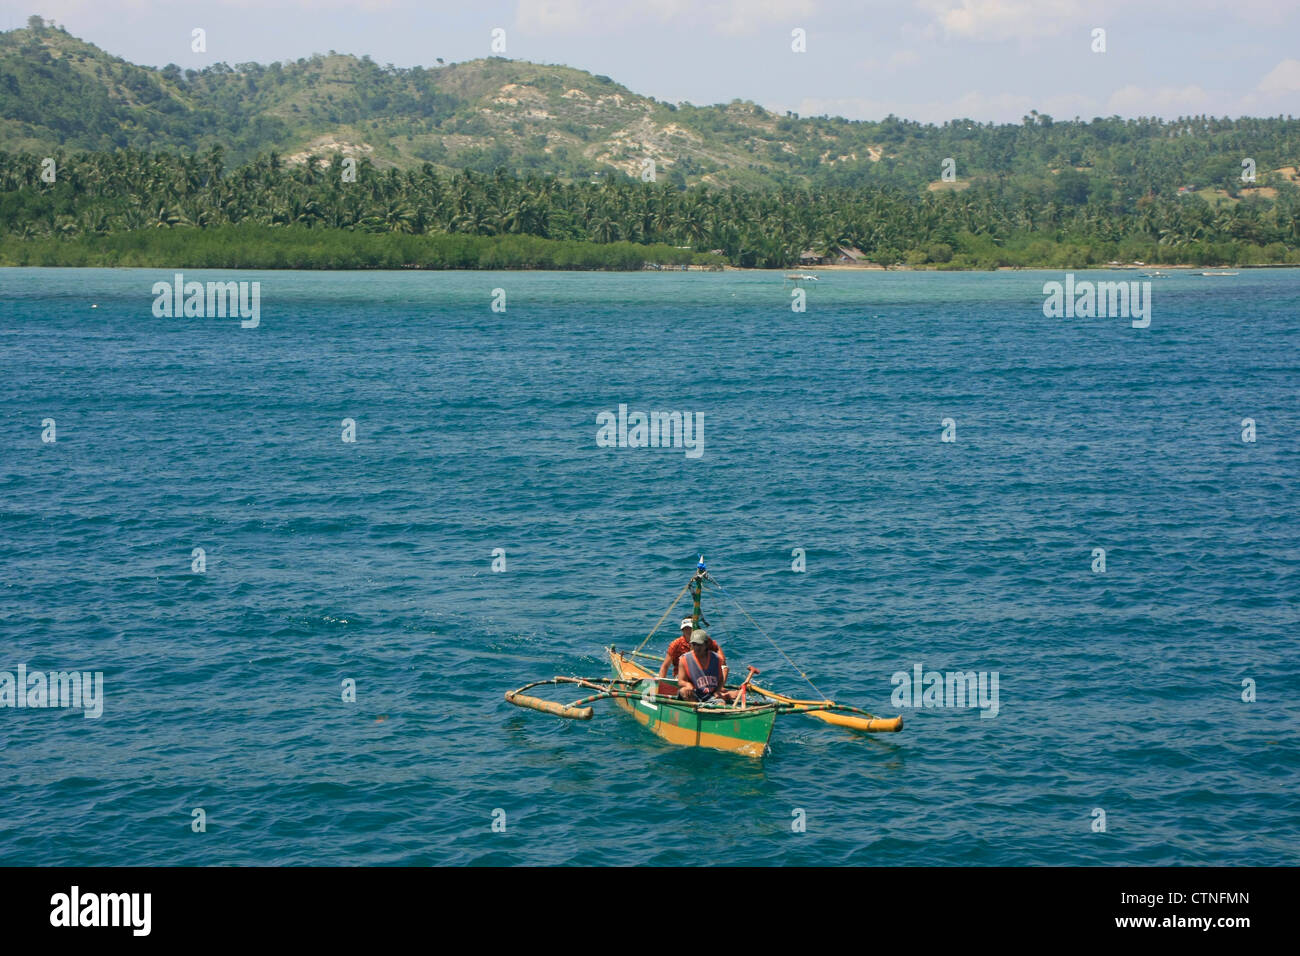 Outrigger boat in a sea, Philippines Stock Photo